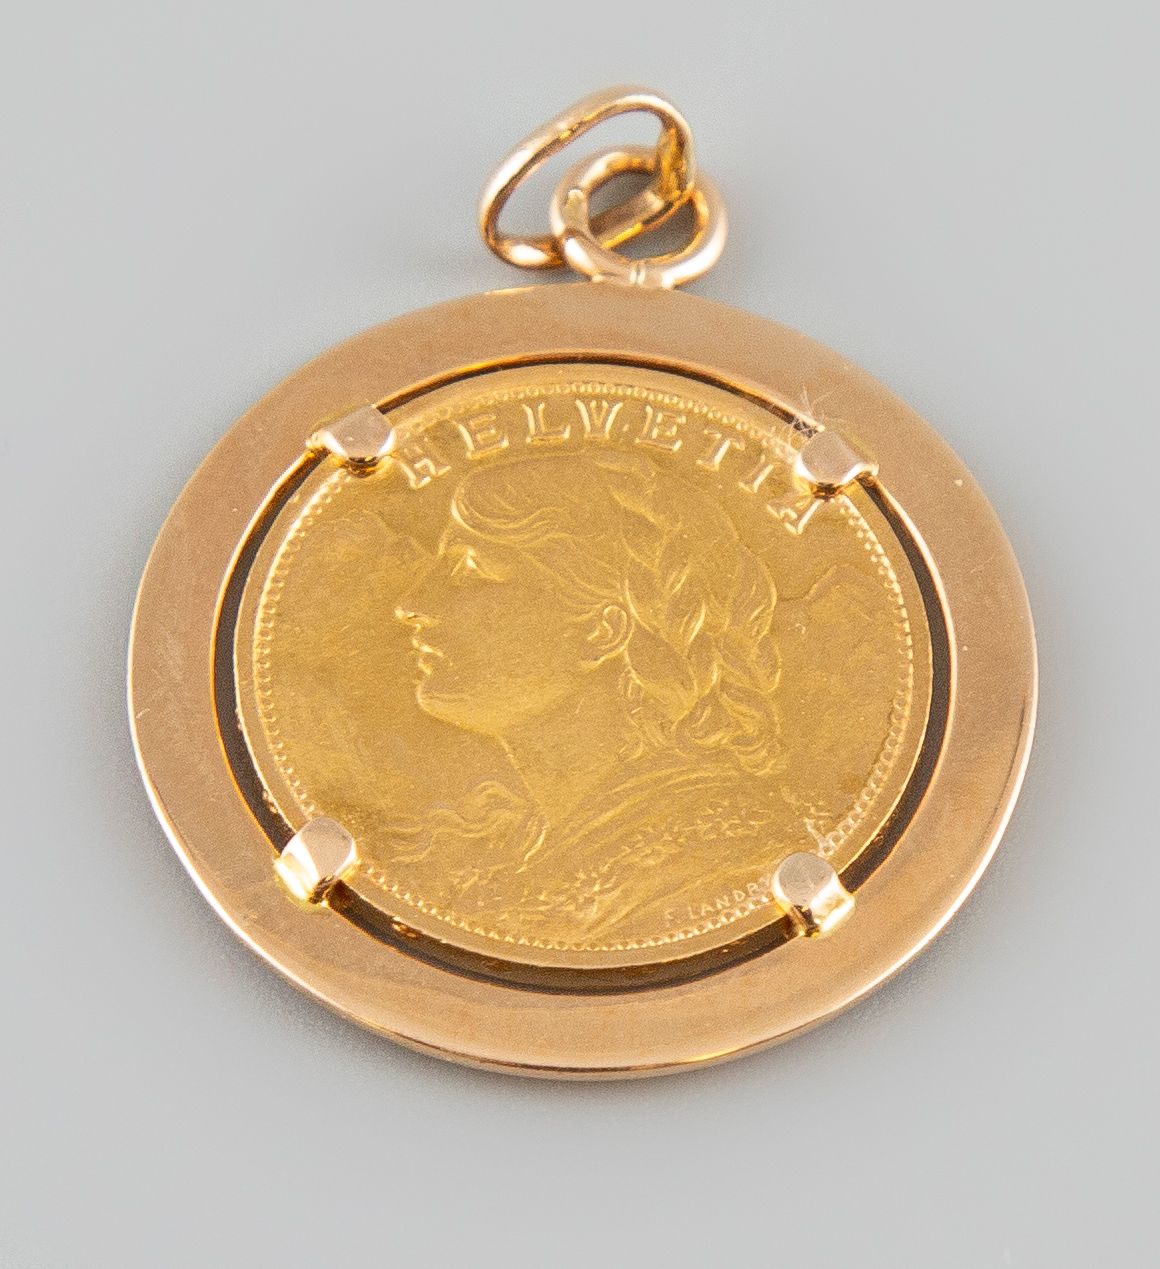 Null Swiss coin mounted in yellow gold pendant dated 1935. Weight 9,7g.